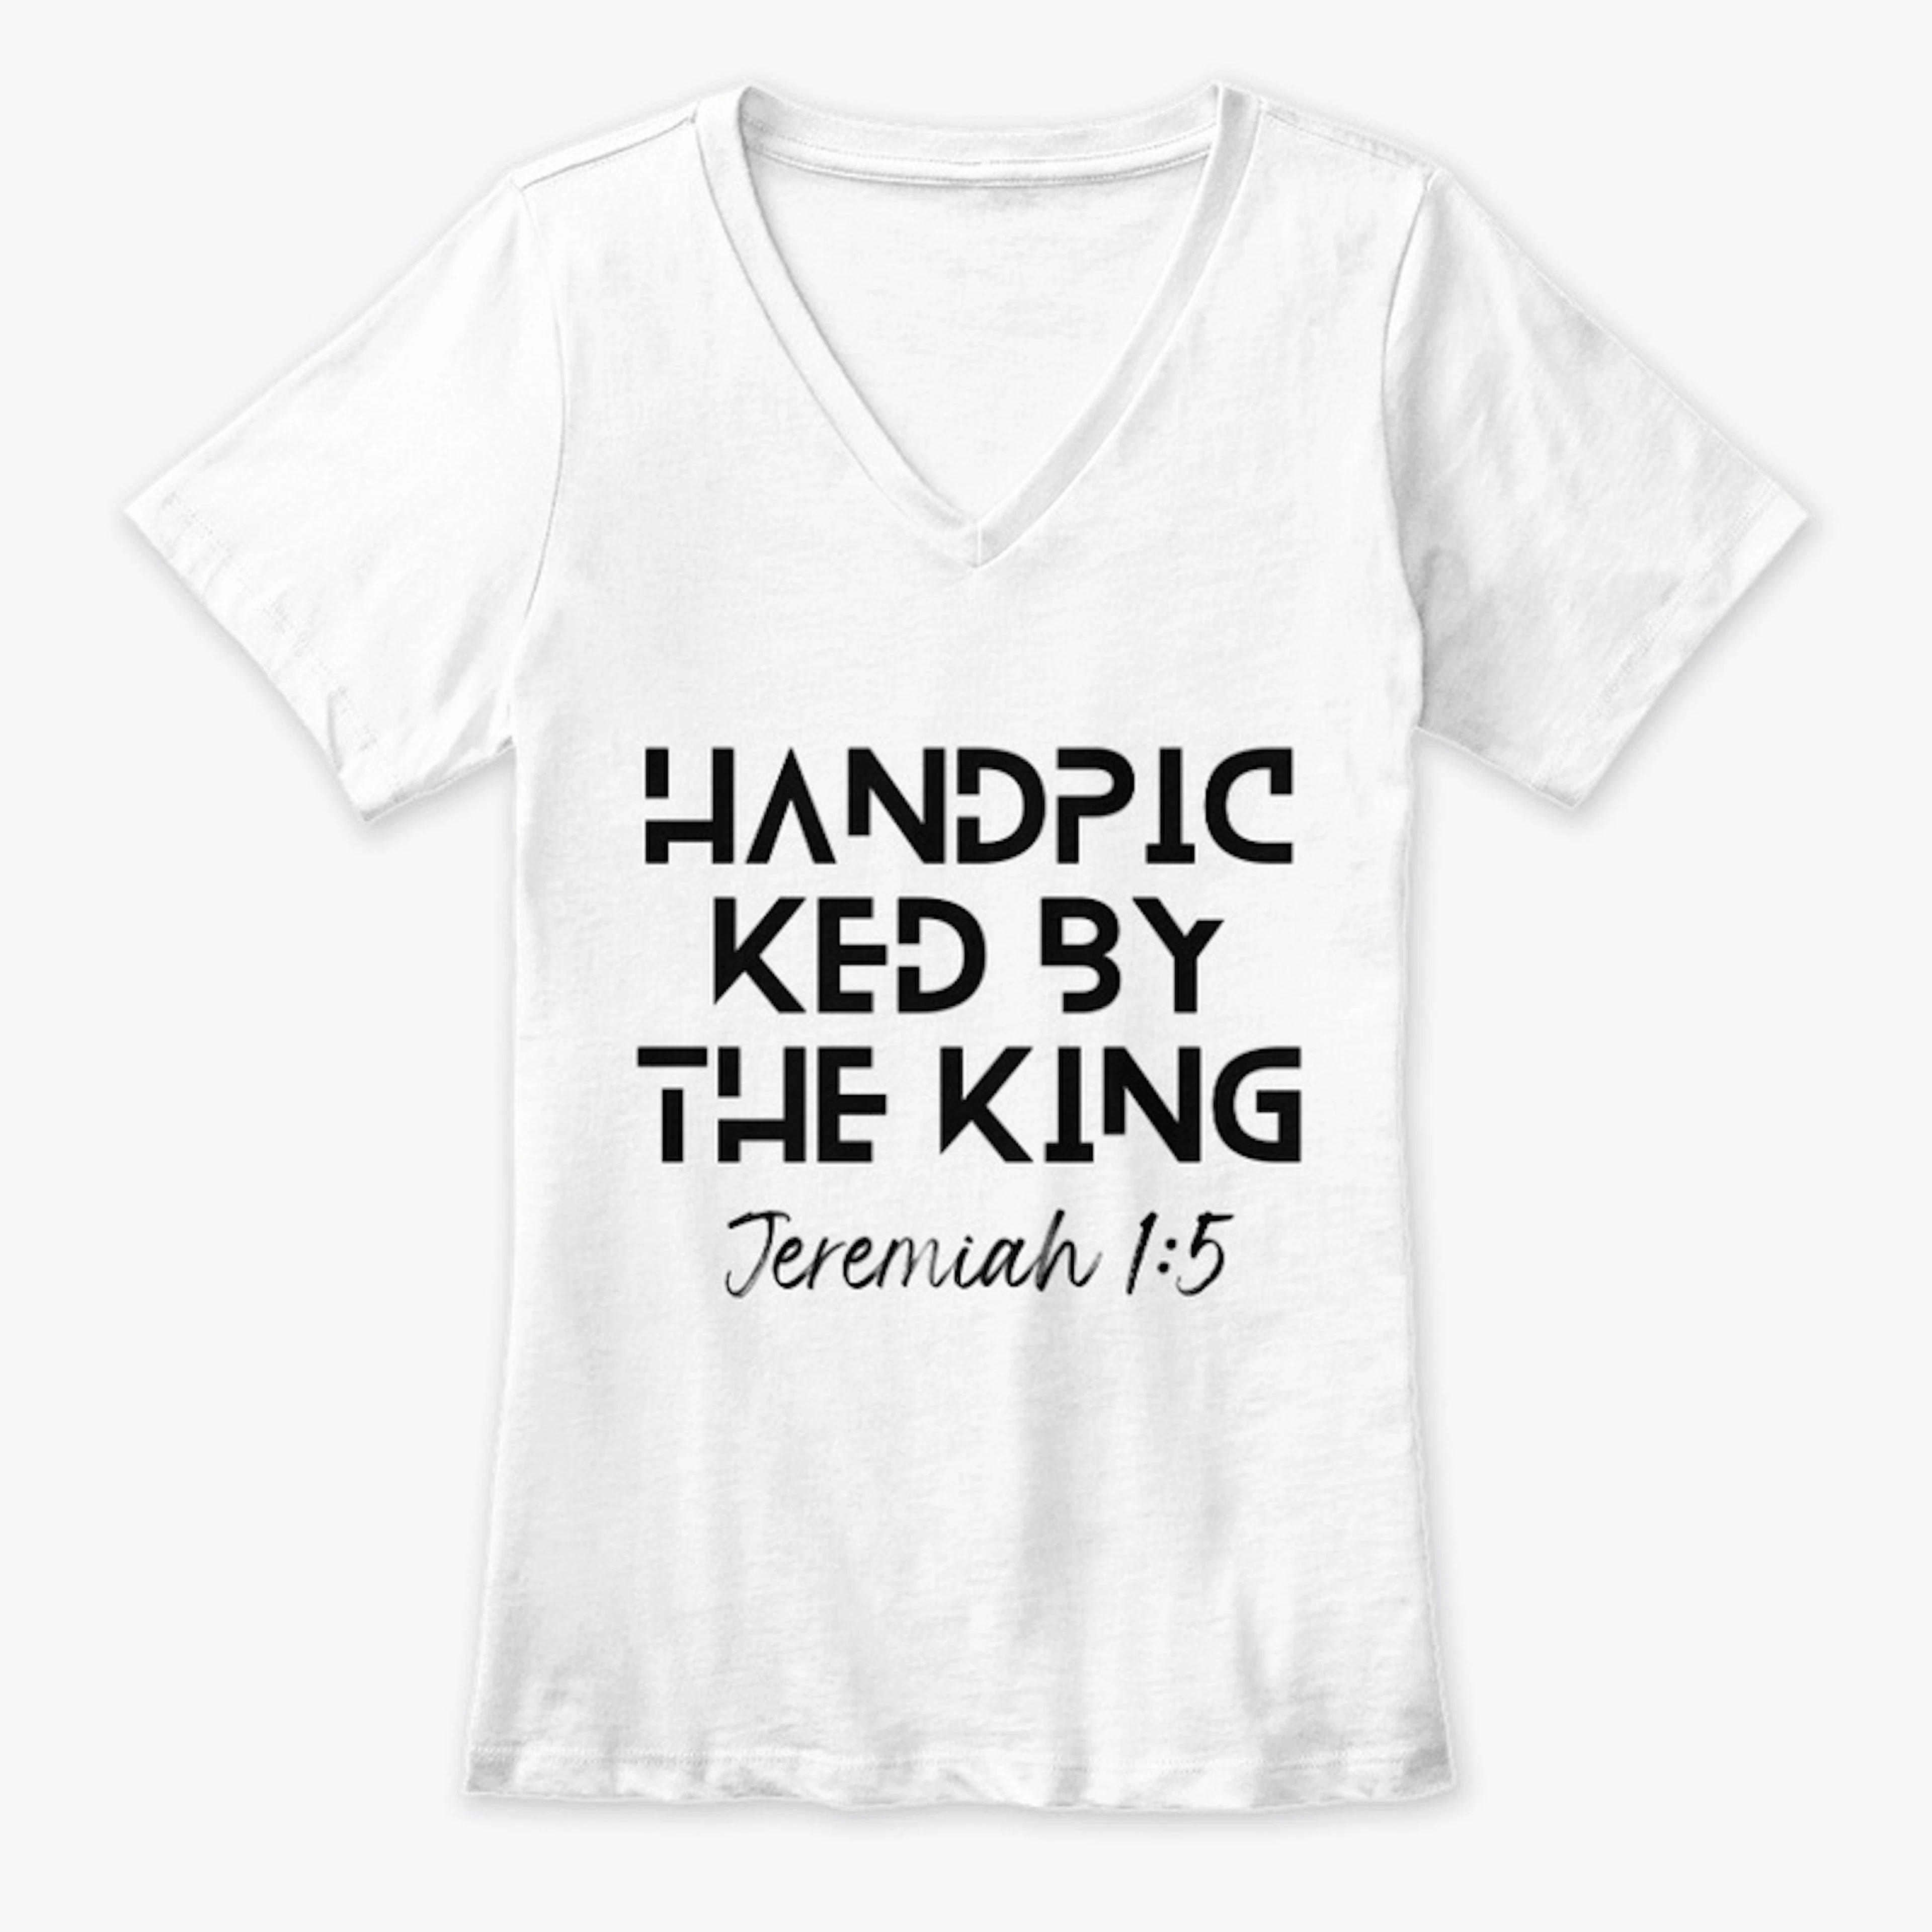 Handpicked by the king